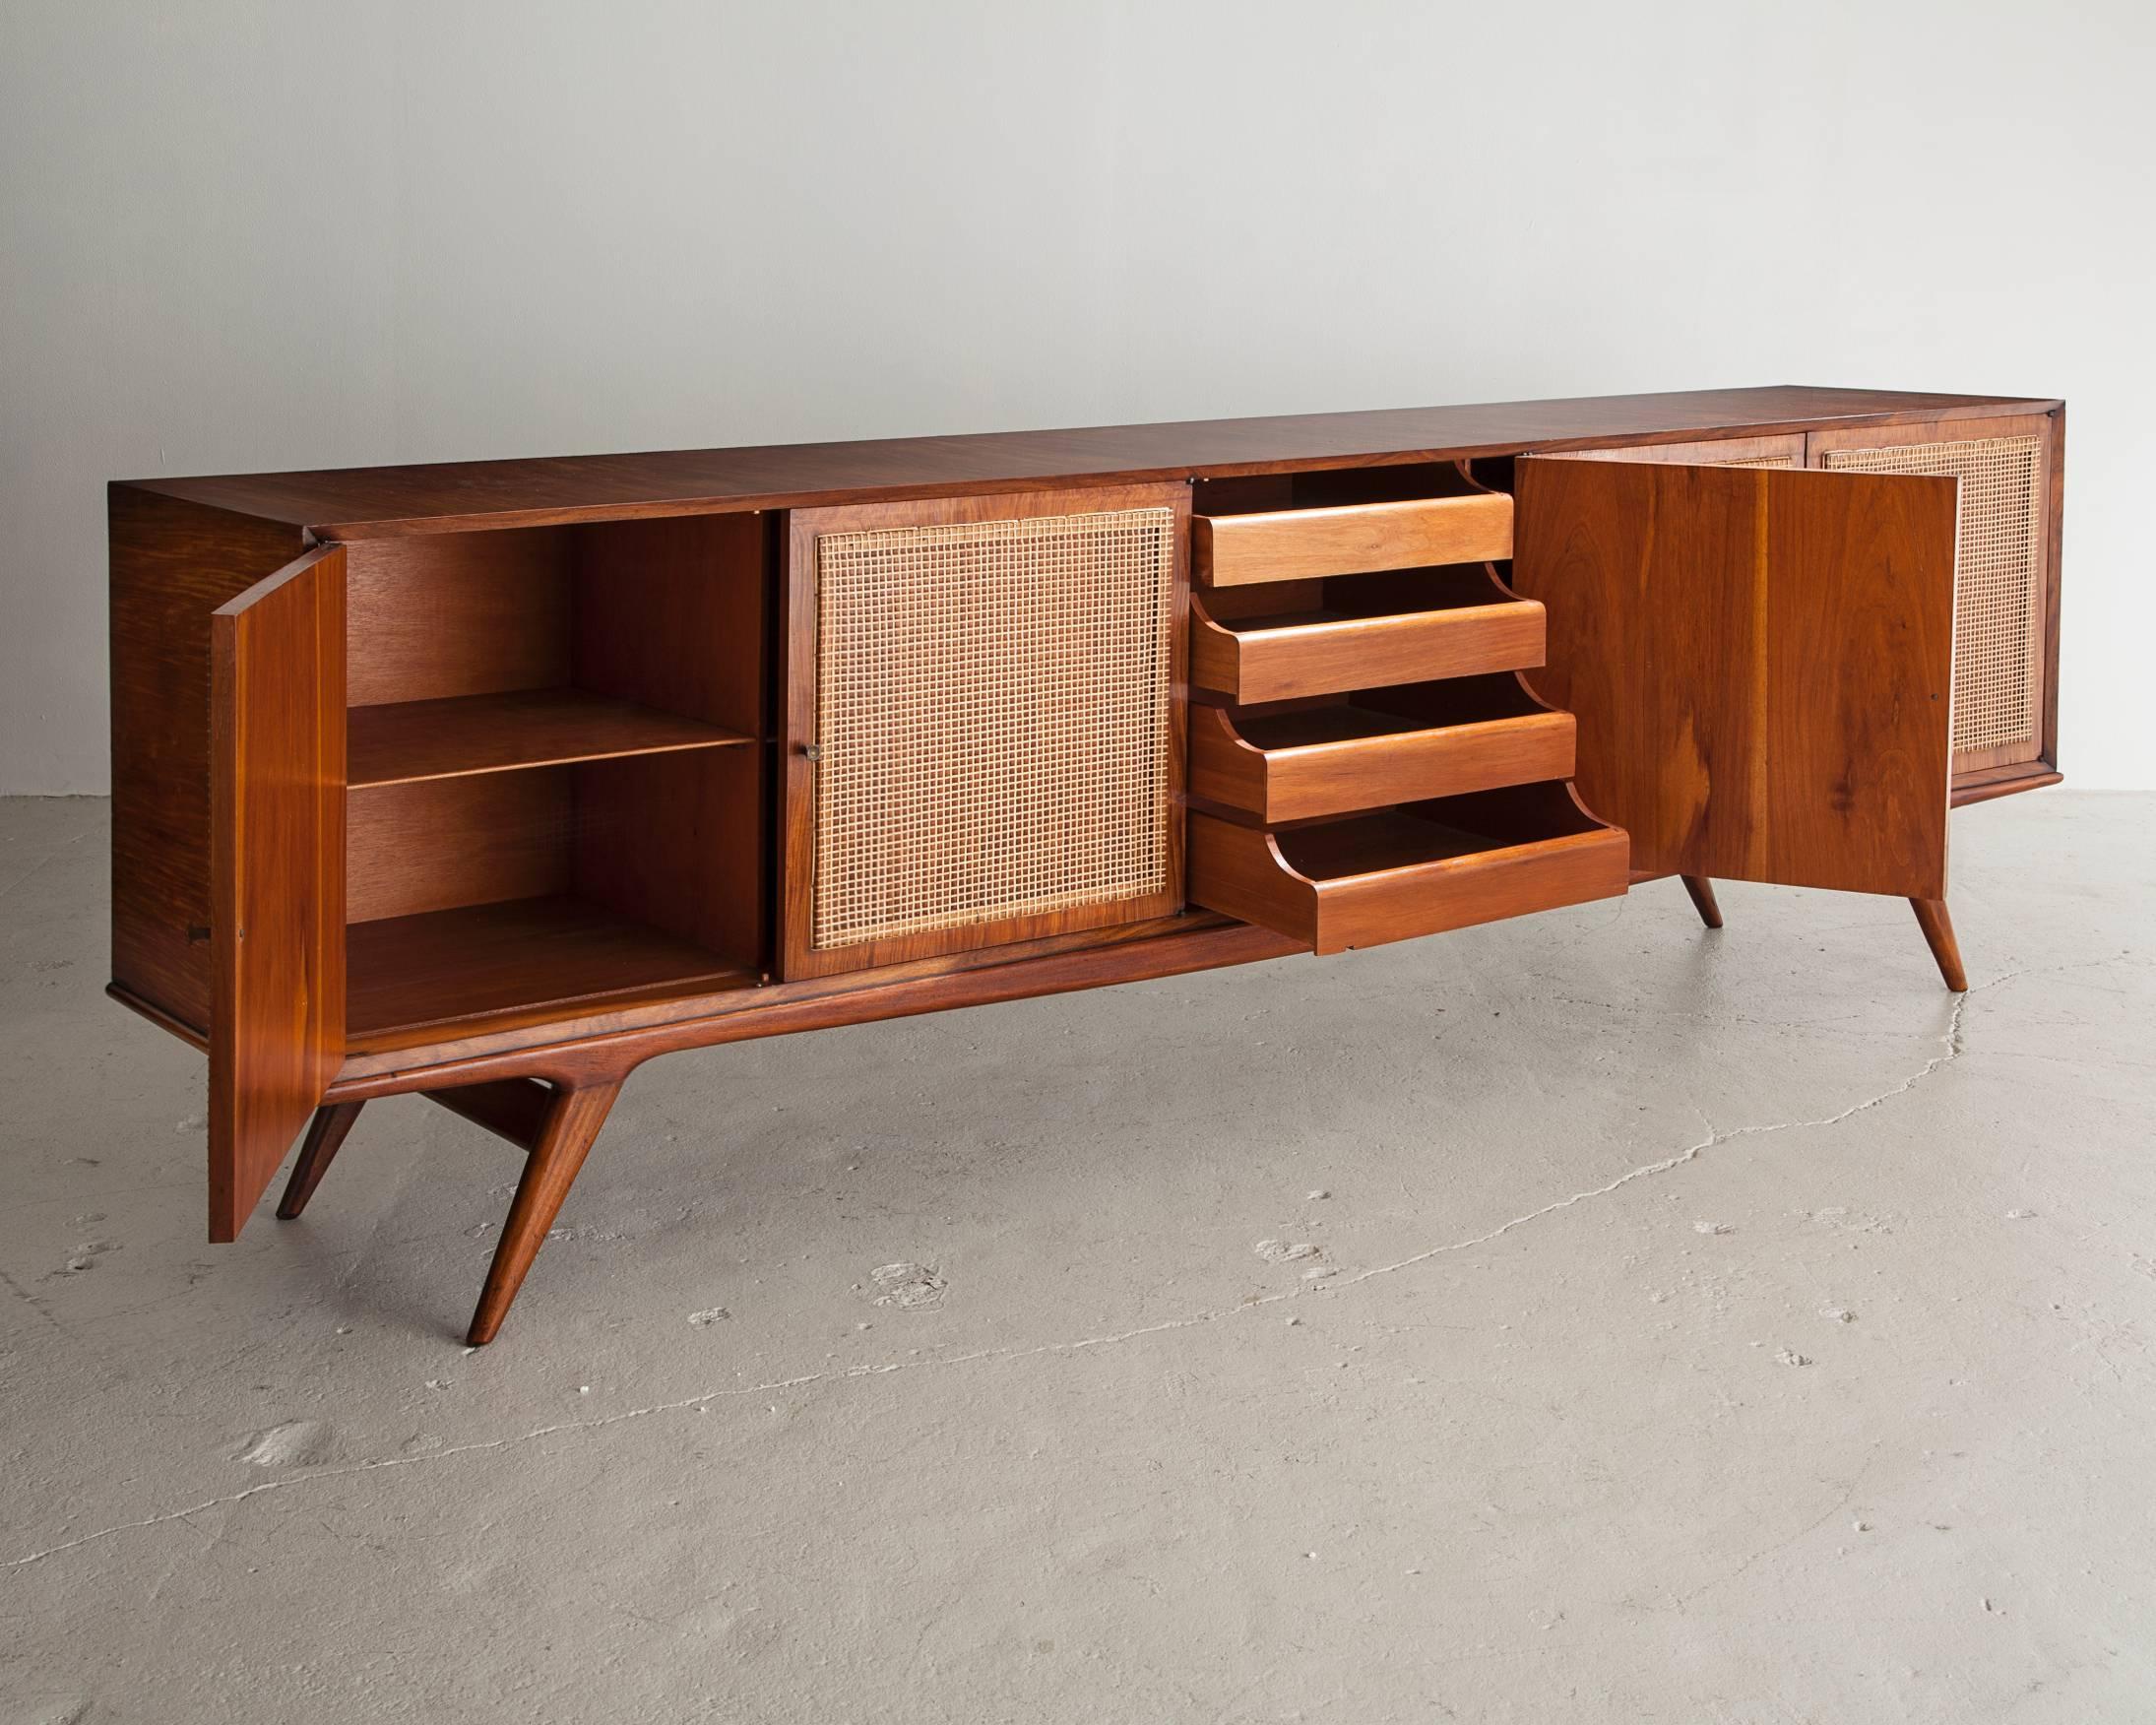 Brazilian Credenza in Caviona Wood with a Cane Front by Martin Eisler, Brazil, 1950s